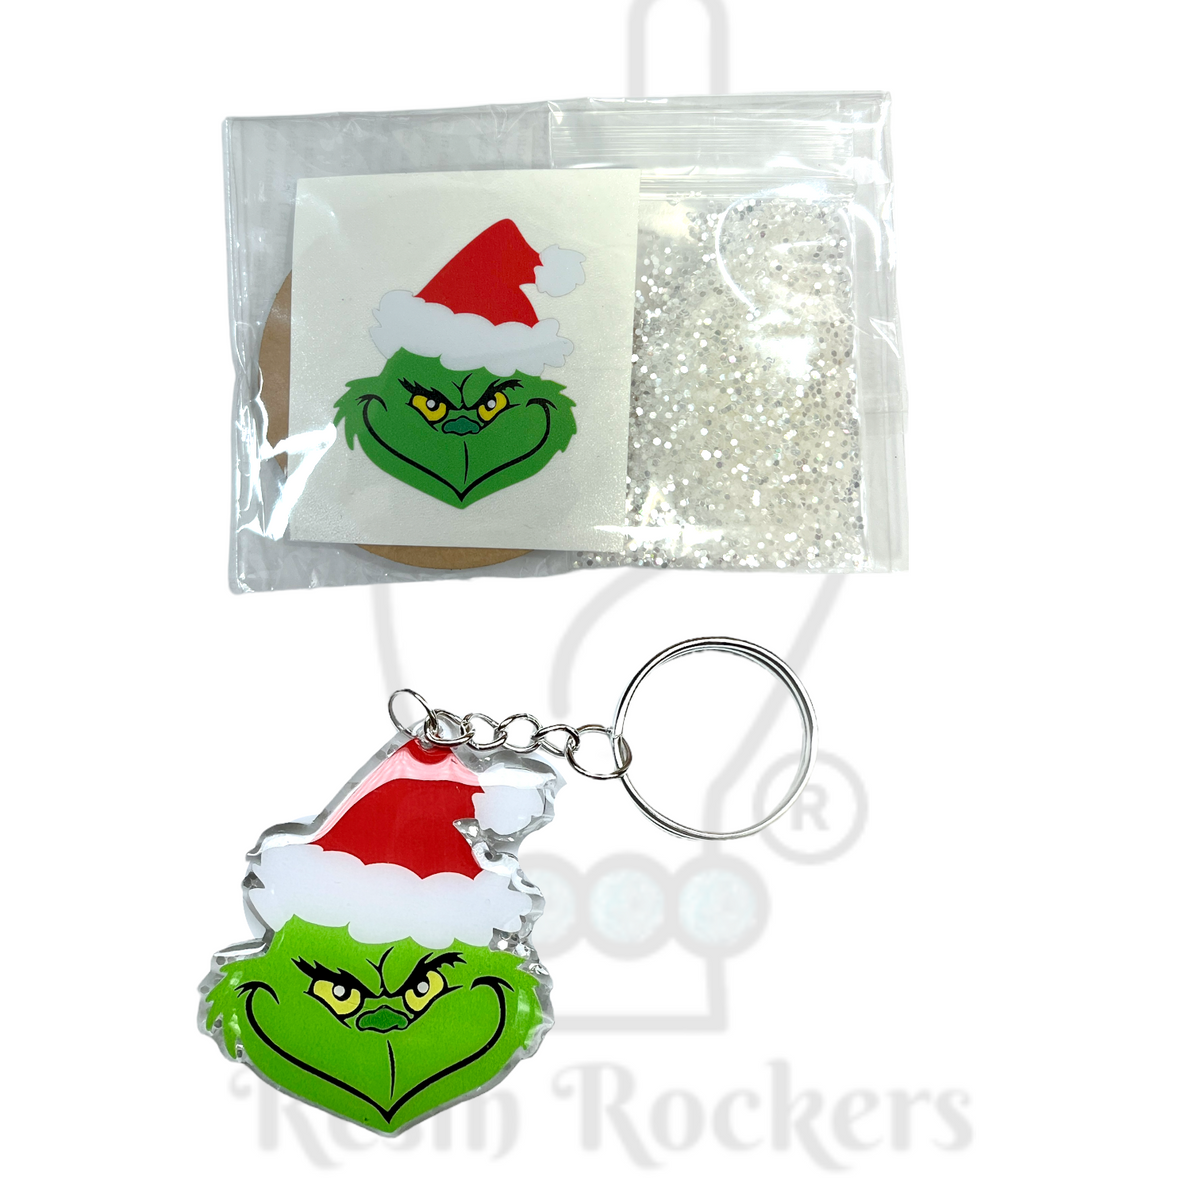 Grinchy Inspired Acrylic Blank With Decal Keychain Kit